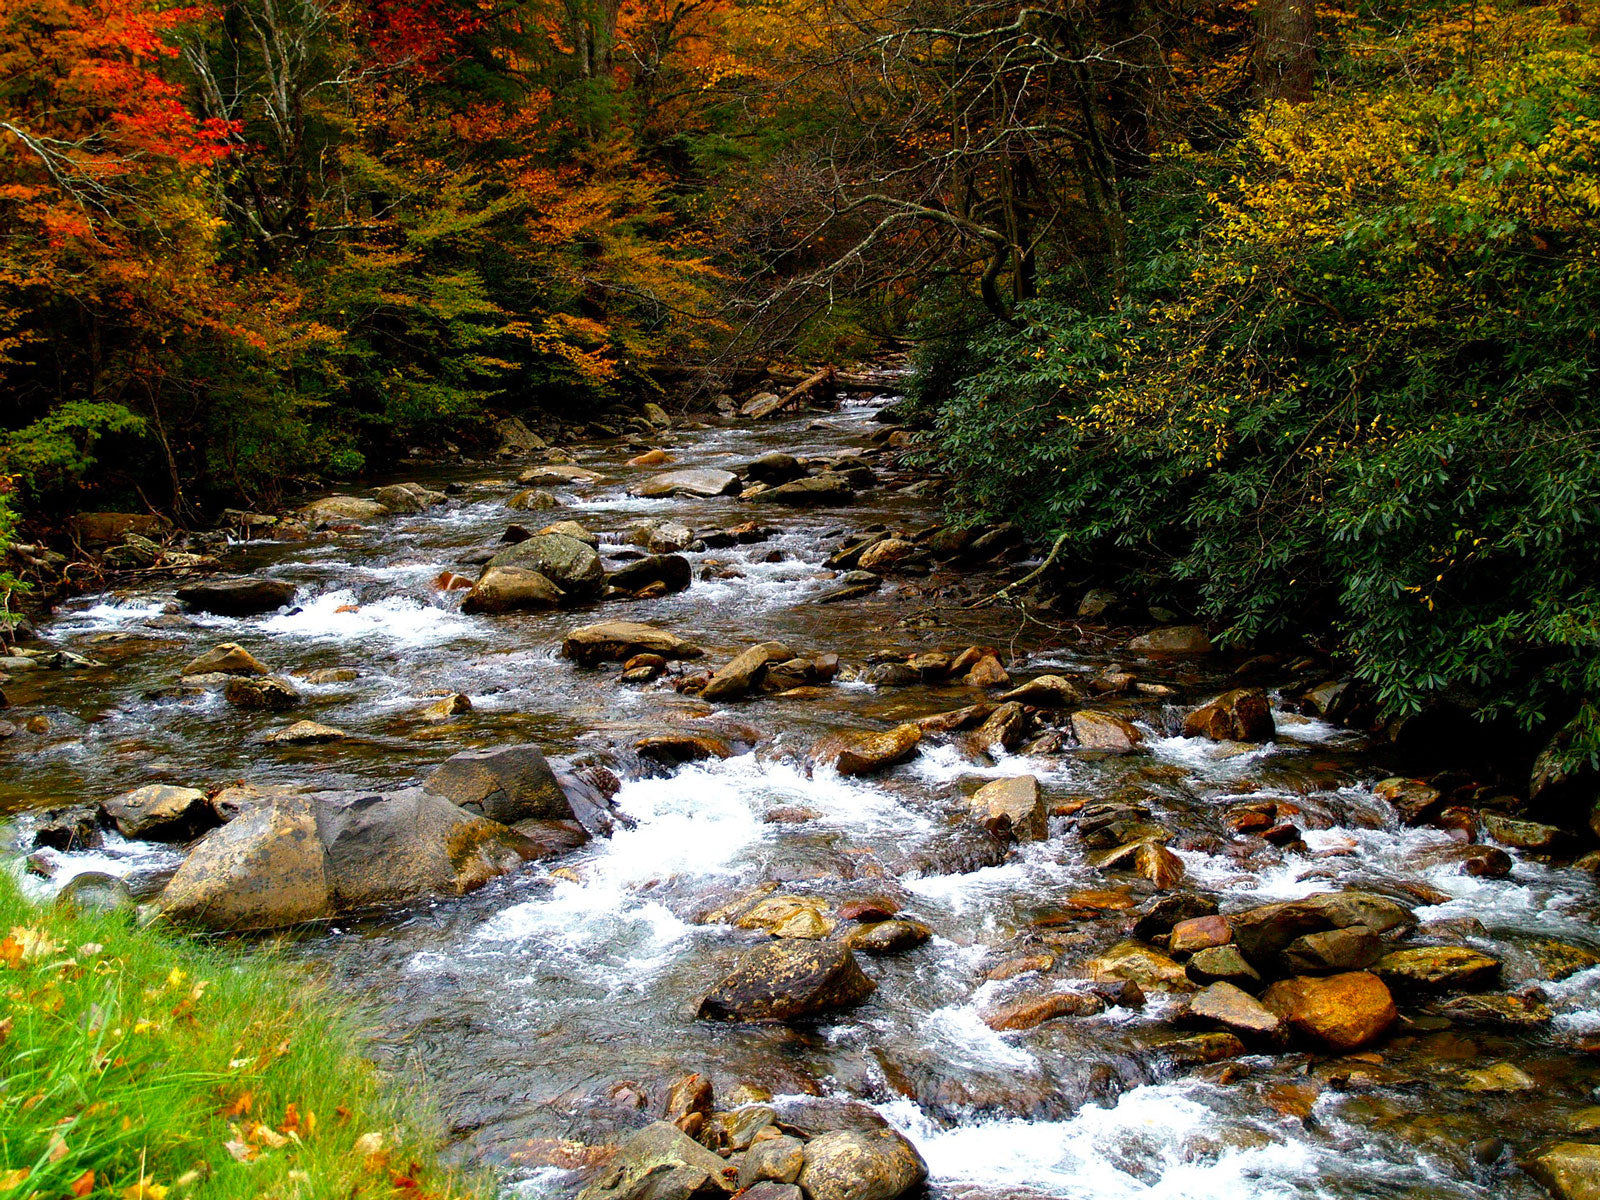 River surrounded by fall colors in Great Smoky Mountains National Park.